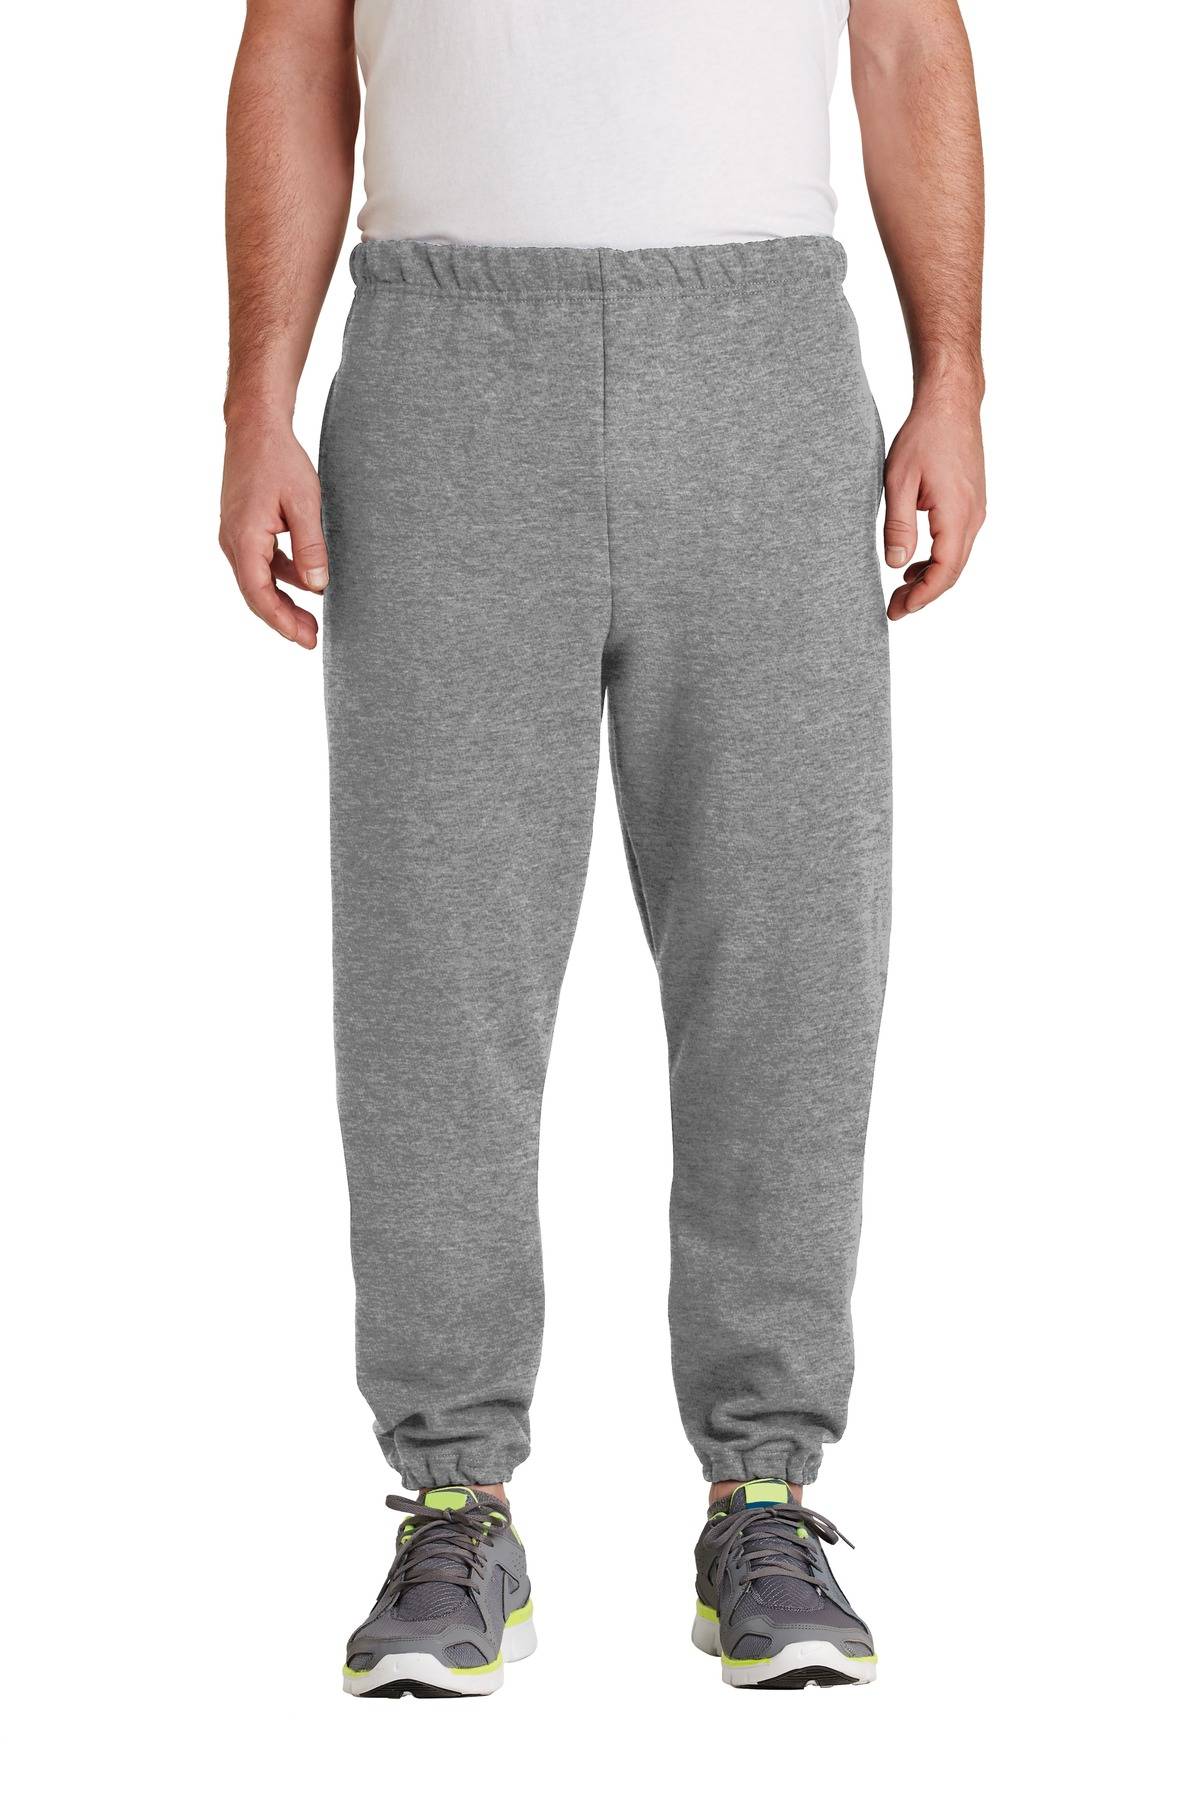 Jerzees 4850MP SUPER SWEATS NuBlend Sweatpant with Pockets in Bulk Price